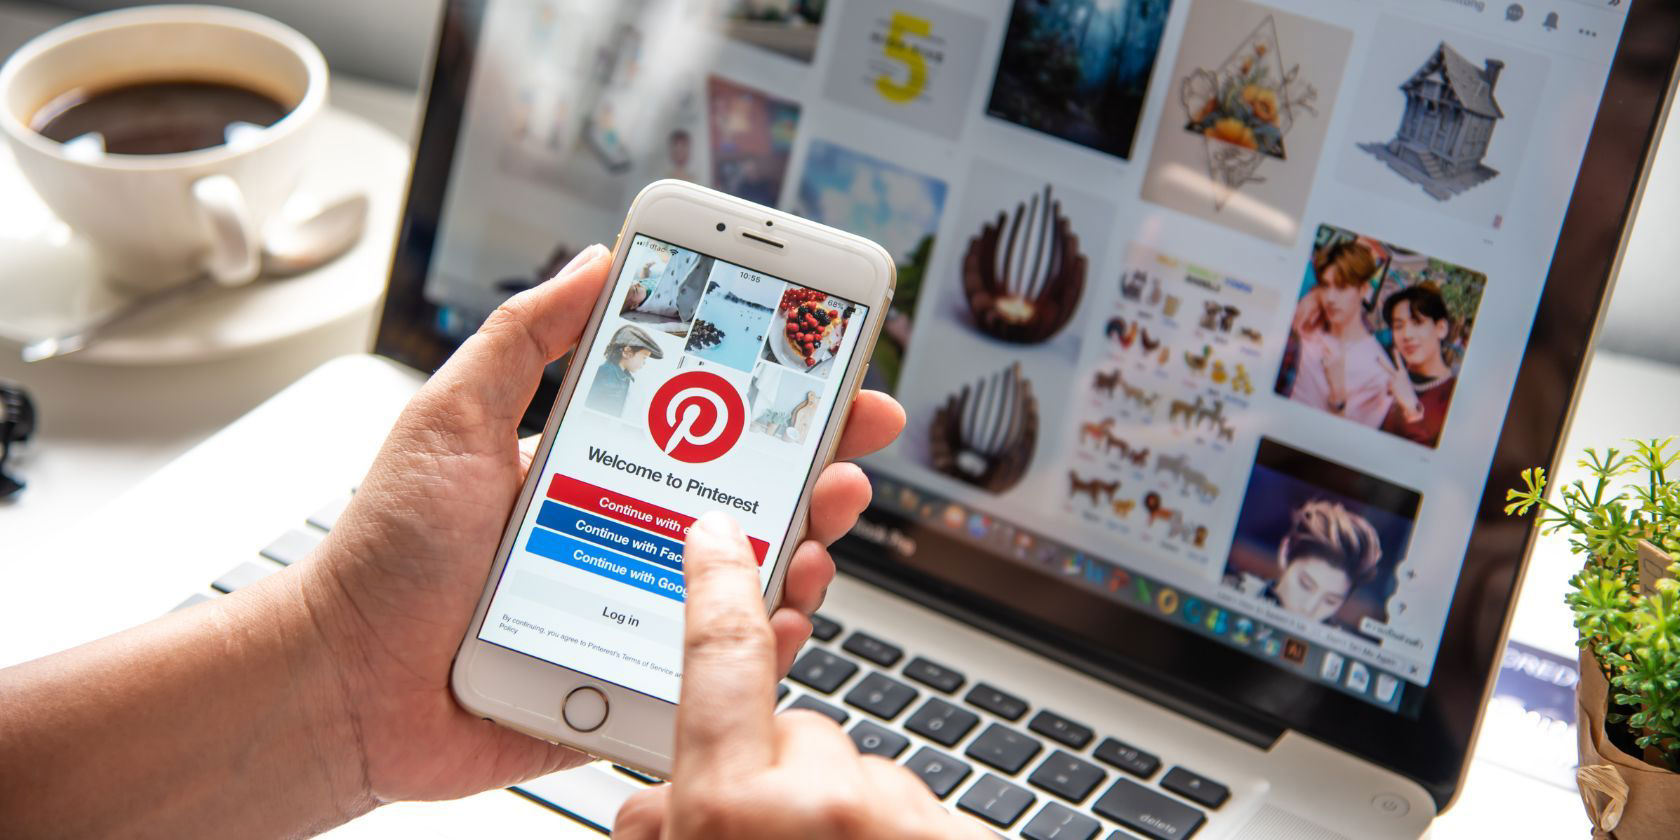 How to Search on Pinterest Without Logging In